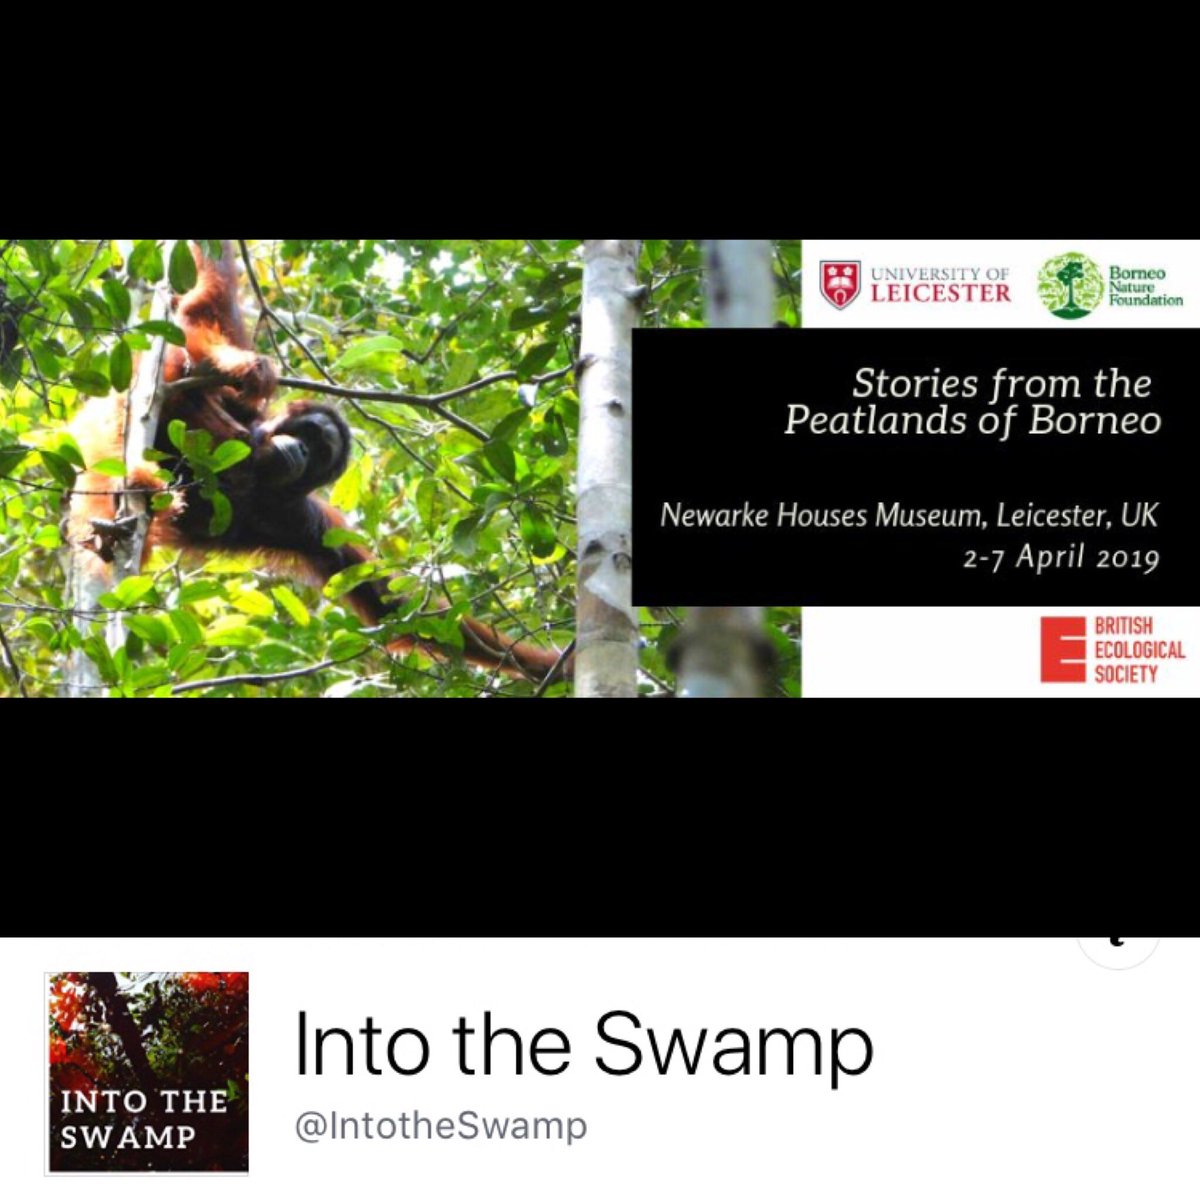 Like and share our new Facebook page to keep up to date with news and events related to the exhibition Into the Swamp coming to Leicester in April 2019! #leicester #leicesterevents #universityofleicester @BritishEcolSoc @BorneoNature @uniofleicester @LeicesterGeog @LeicesterUnion